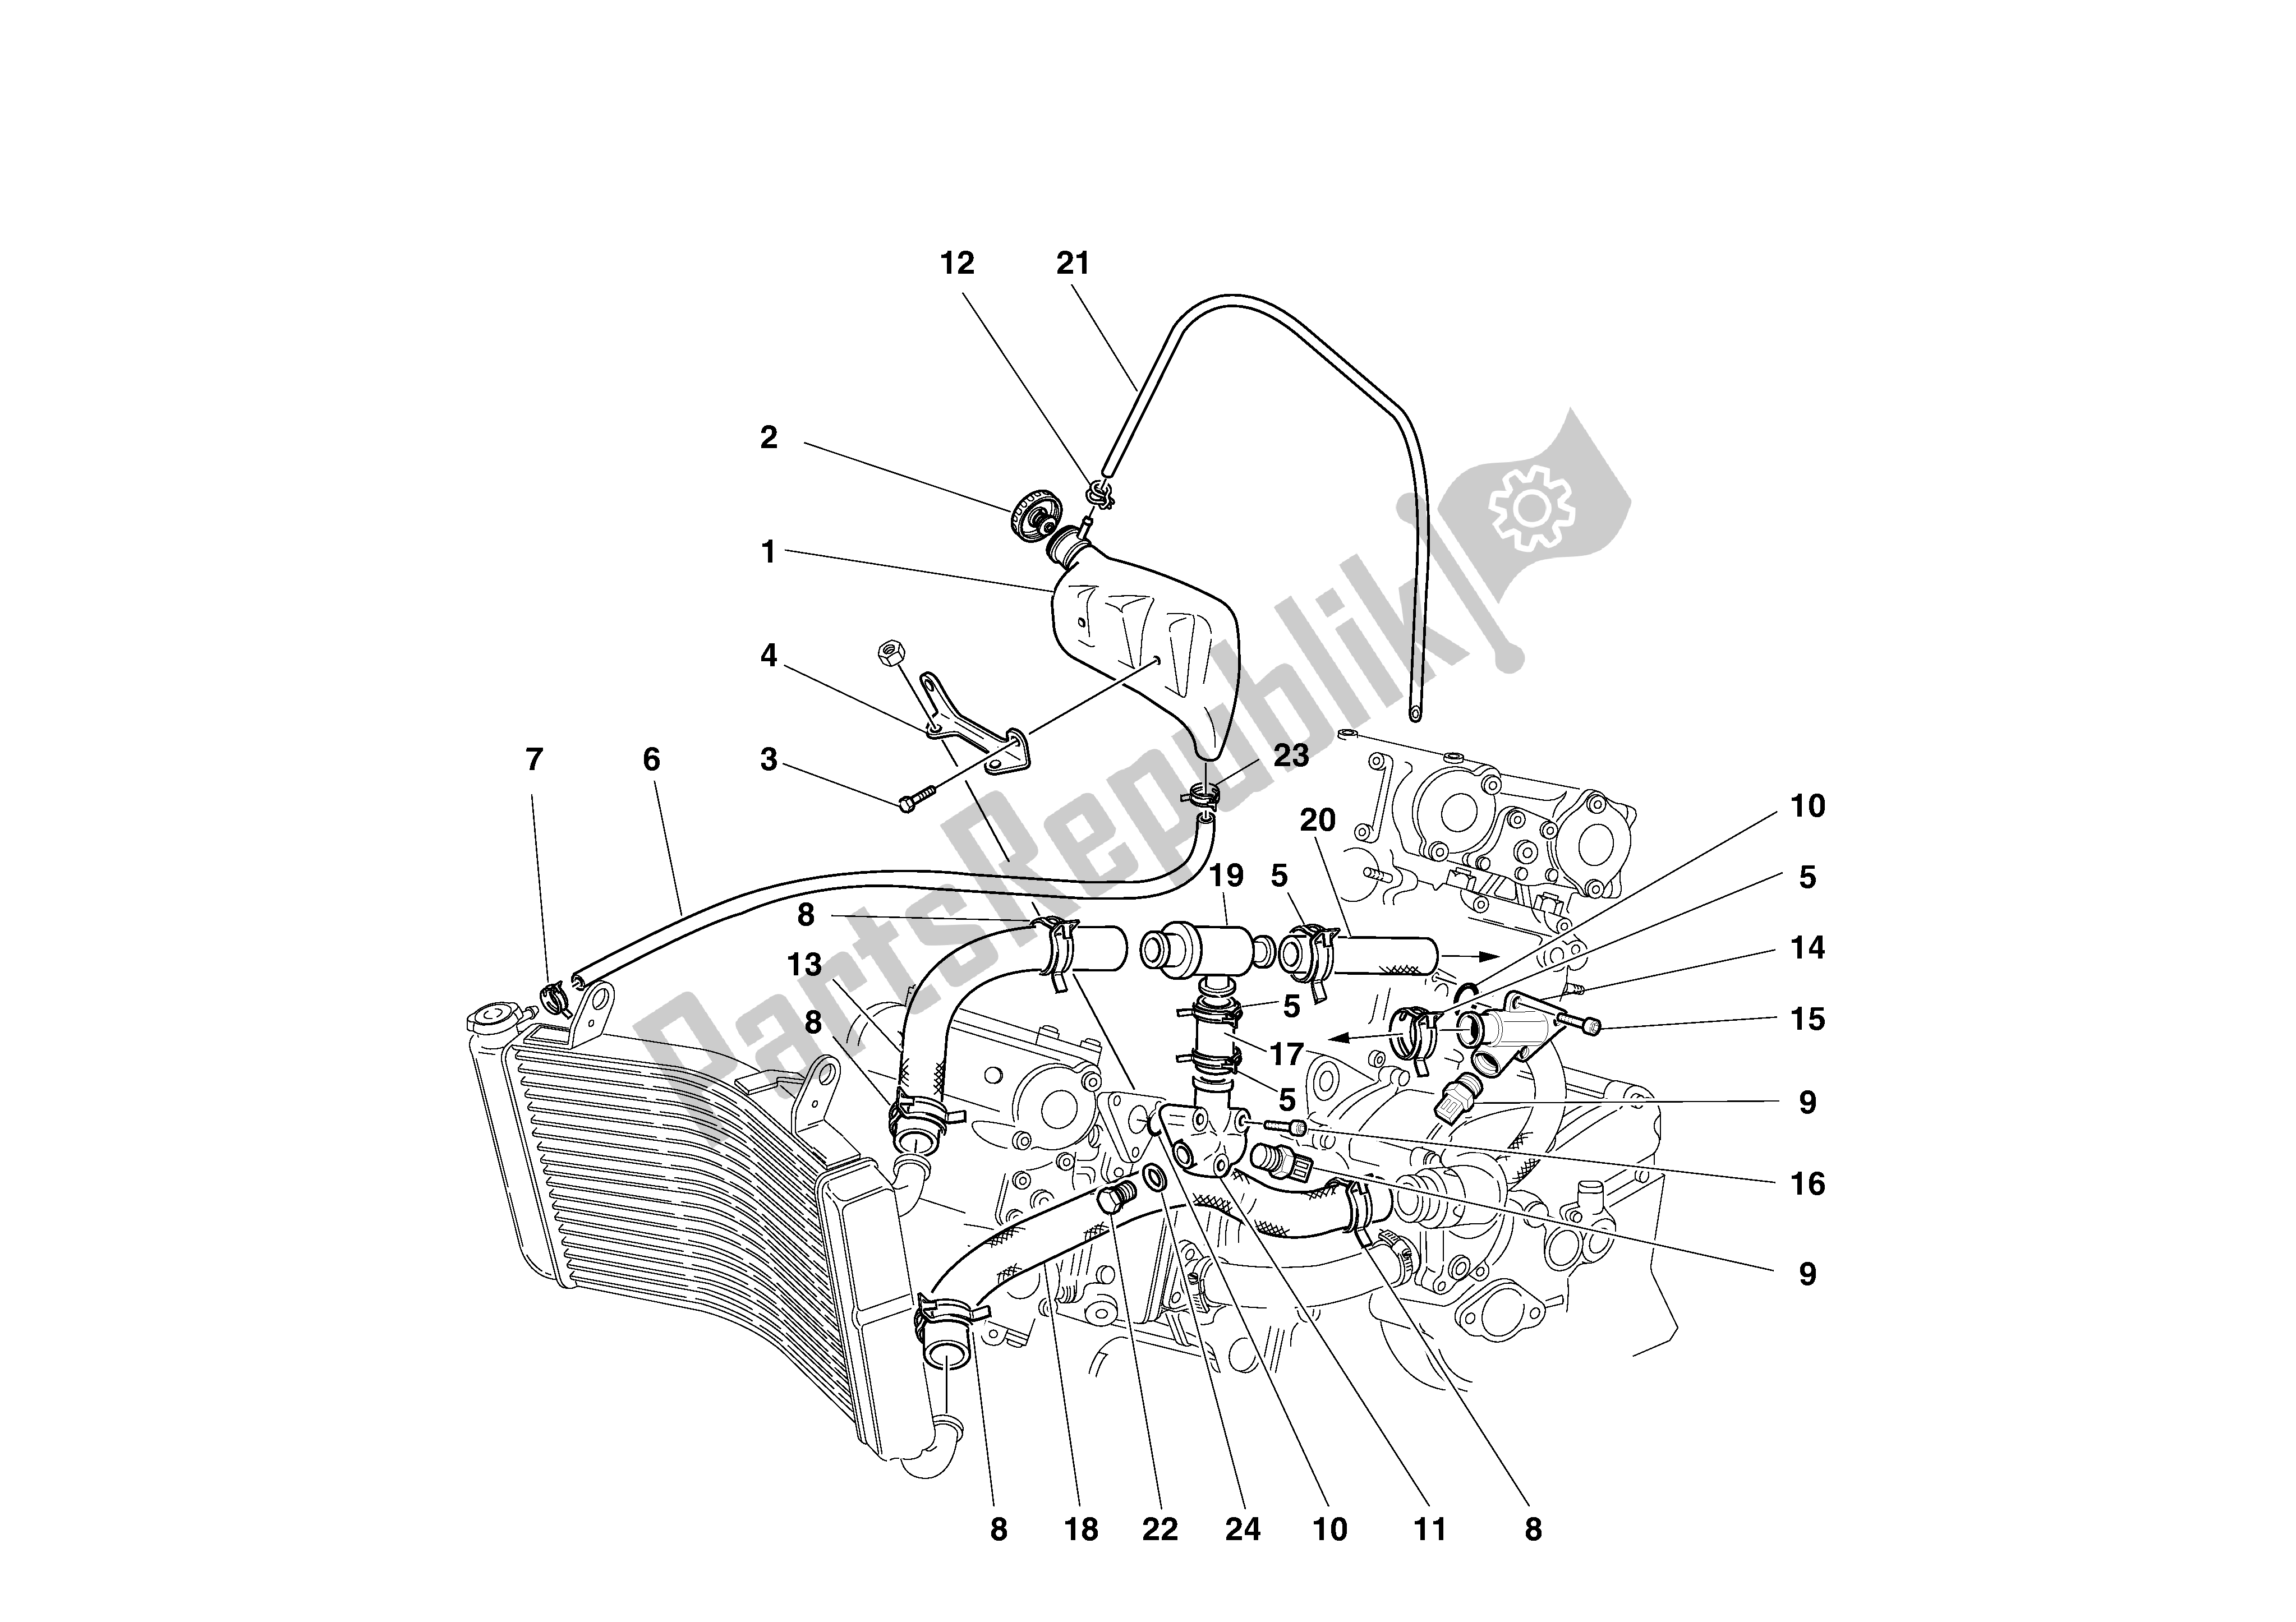 All parts for the Cooling Circuit of the Ducati Monster S4 916 2002